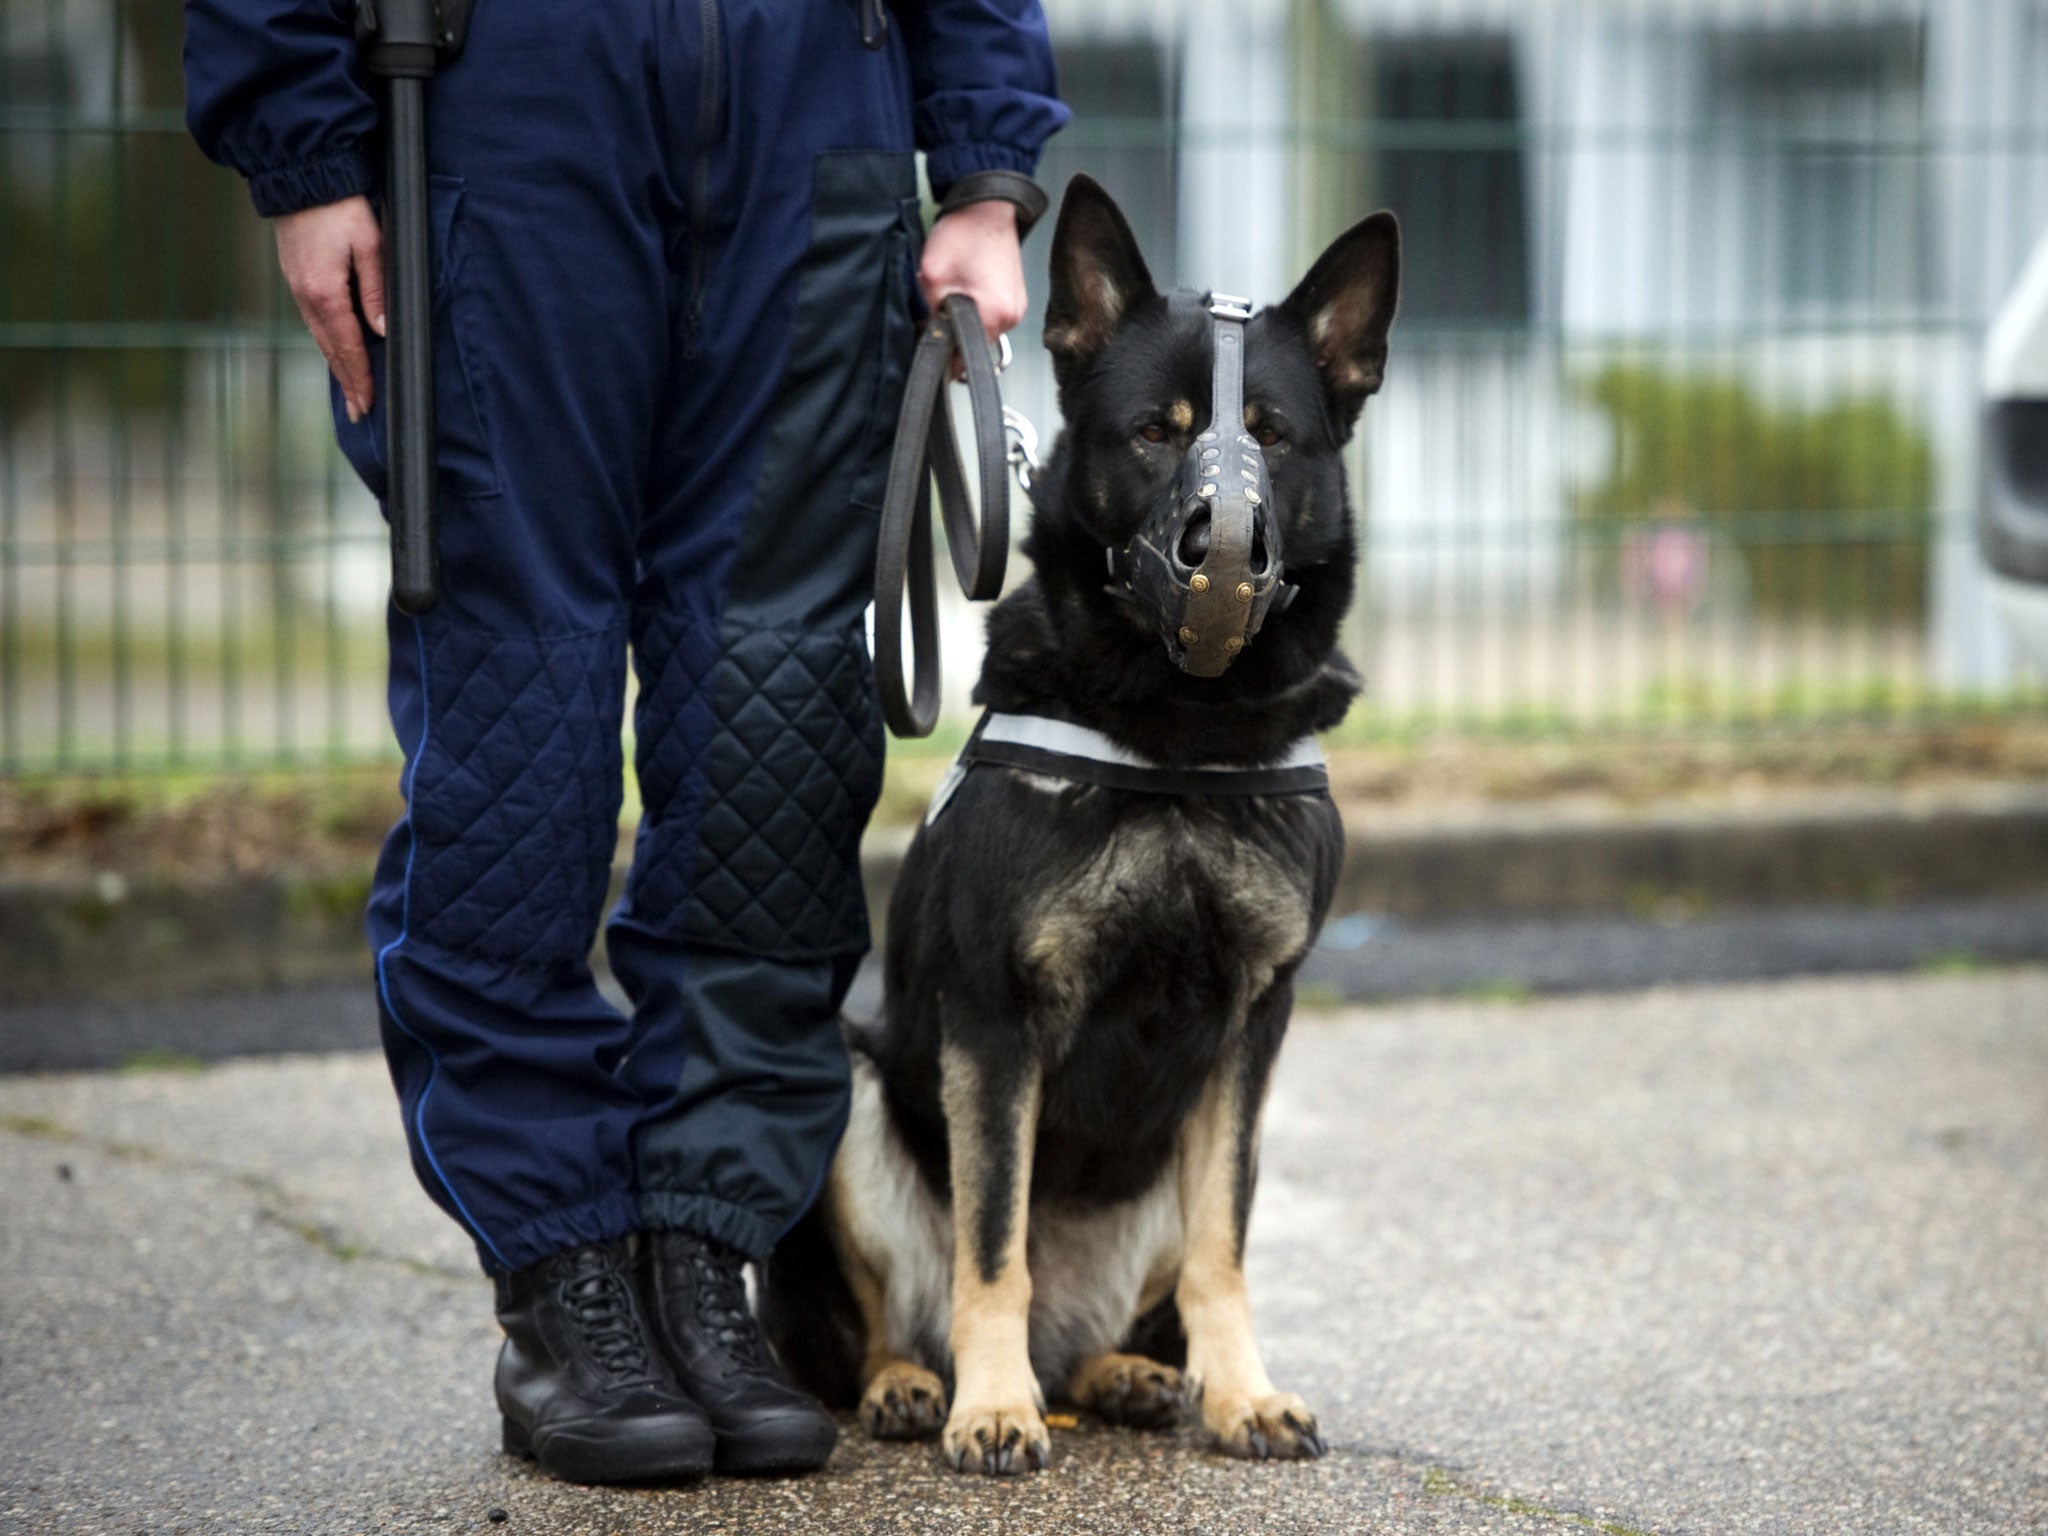 A municipal policeman and his dog stand guard as they wait for the visit of French President Nicolas Sarkozy on February 3, 2011, in Orleans, center France, during a visit focused on crime prevention and national security.